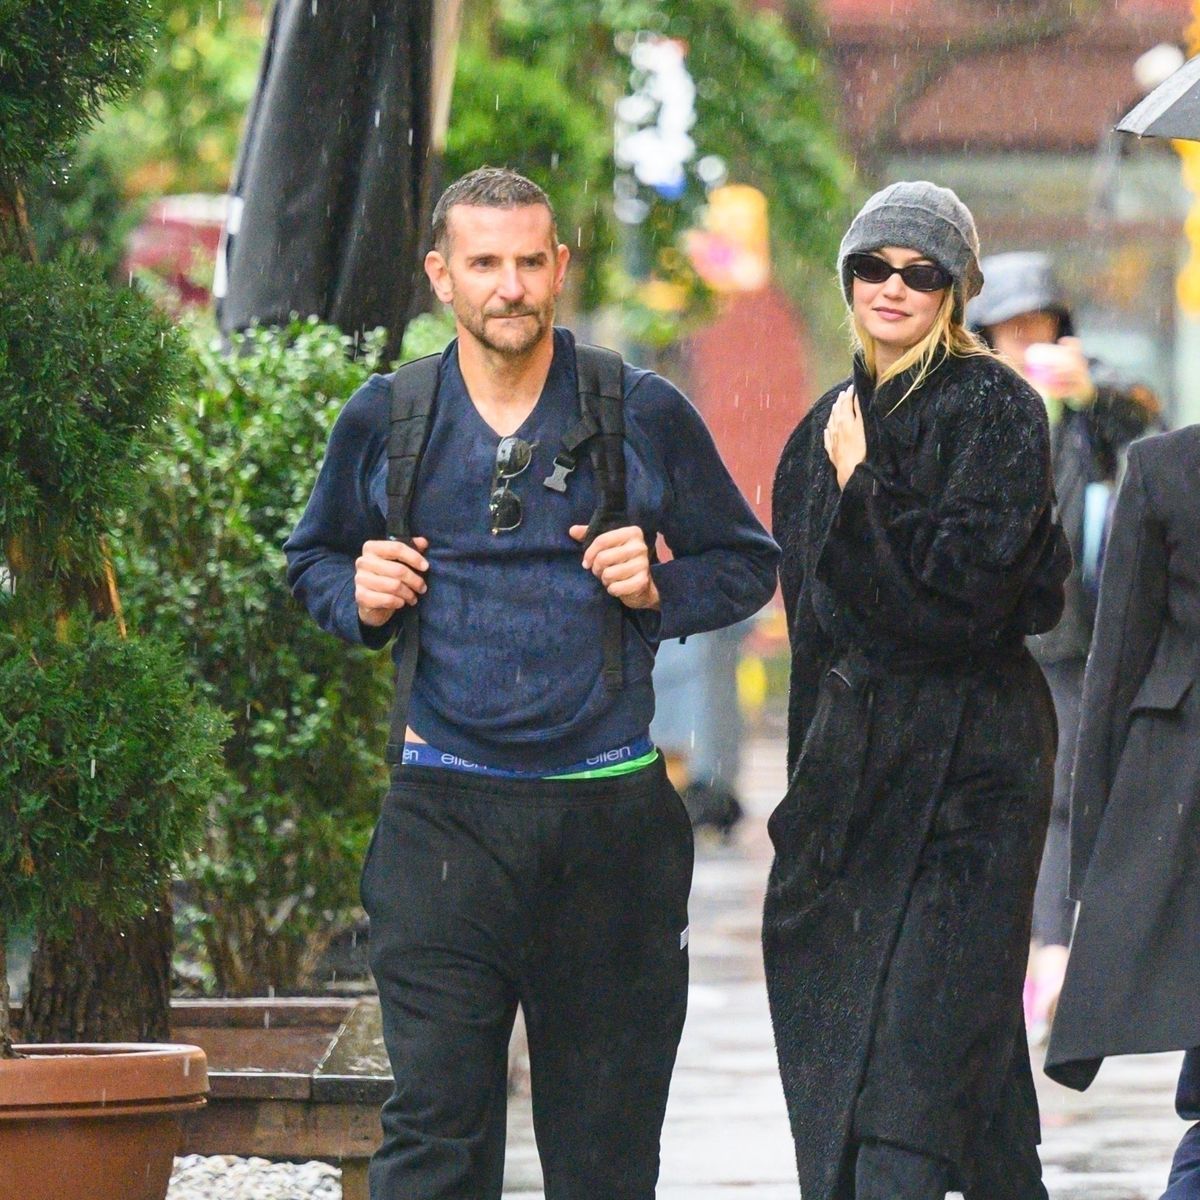 Gigi Hadid and Bradley Cooper Spotted Together With Weekend Bags in NYC